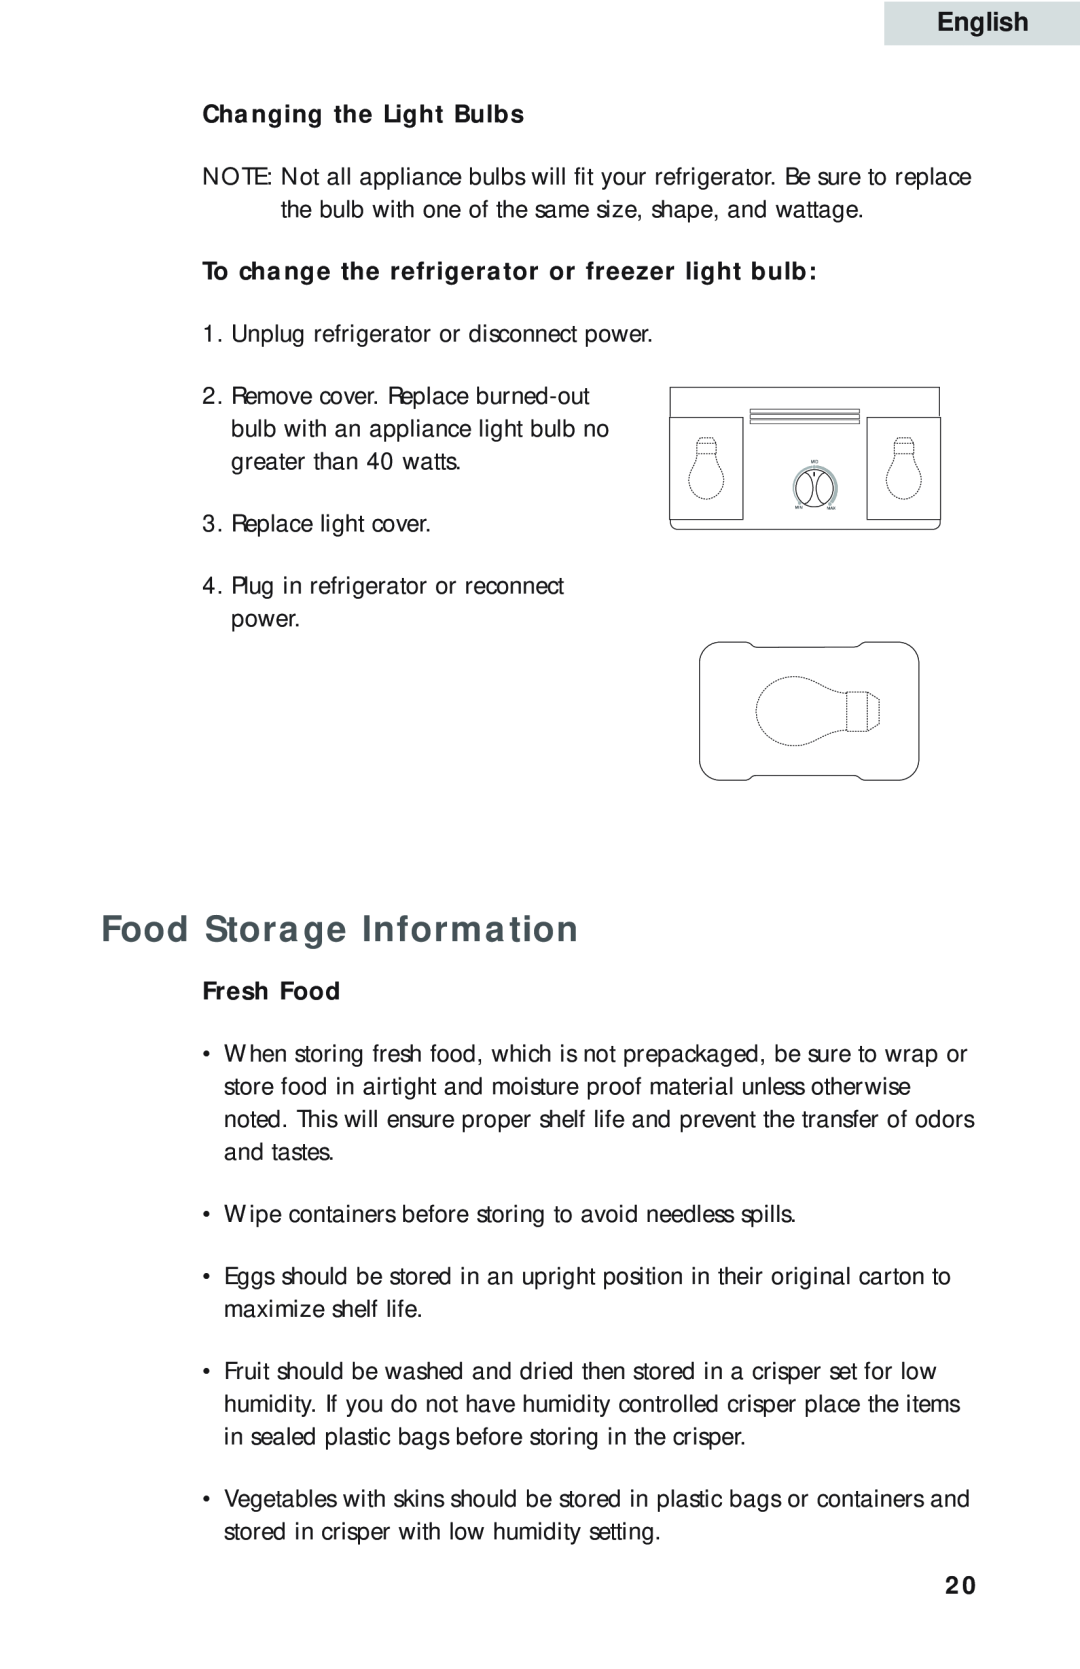 Haier HBQ18, HBP18 Food Storage Information, Changing the Light Bulbs, To change the refrigerator or freezer light bulb 